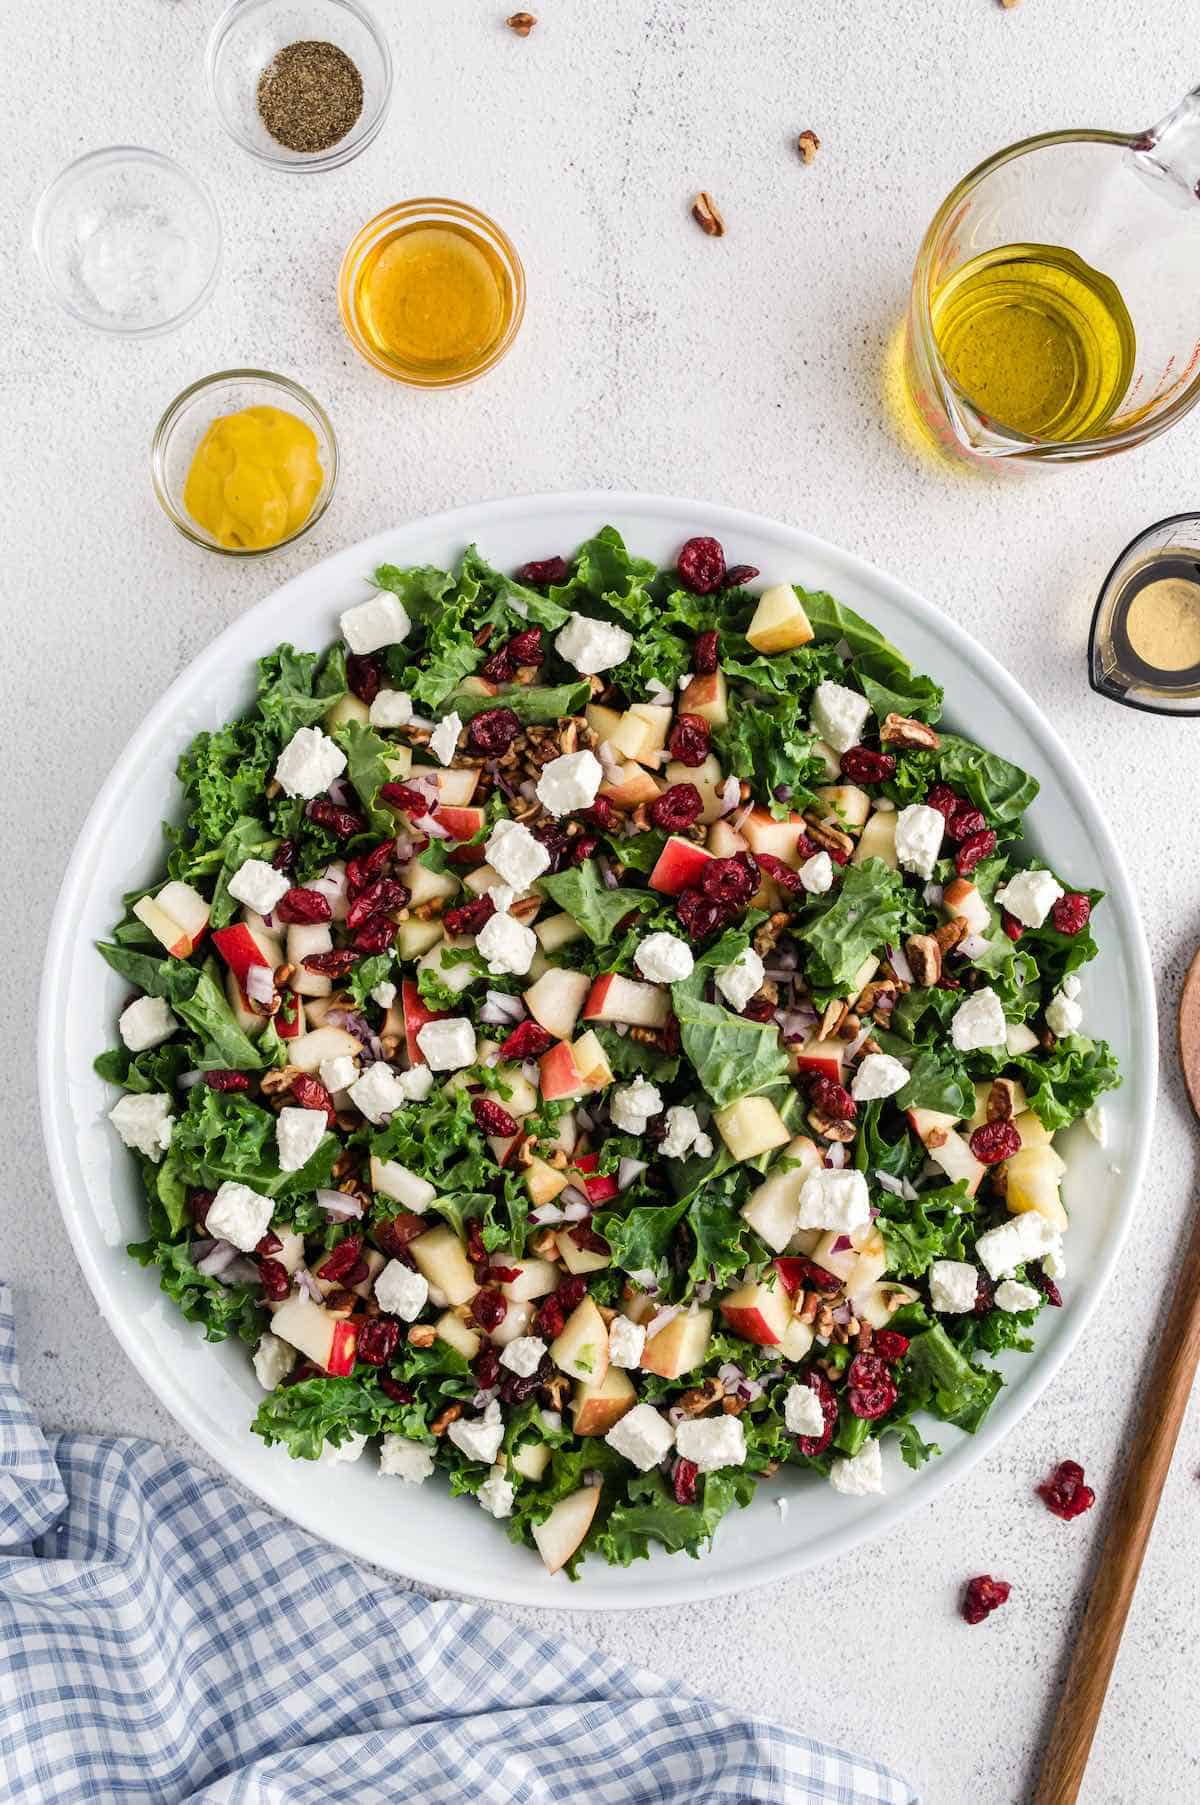 Kale salad with cranberries and feta cheese.